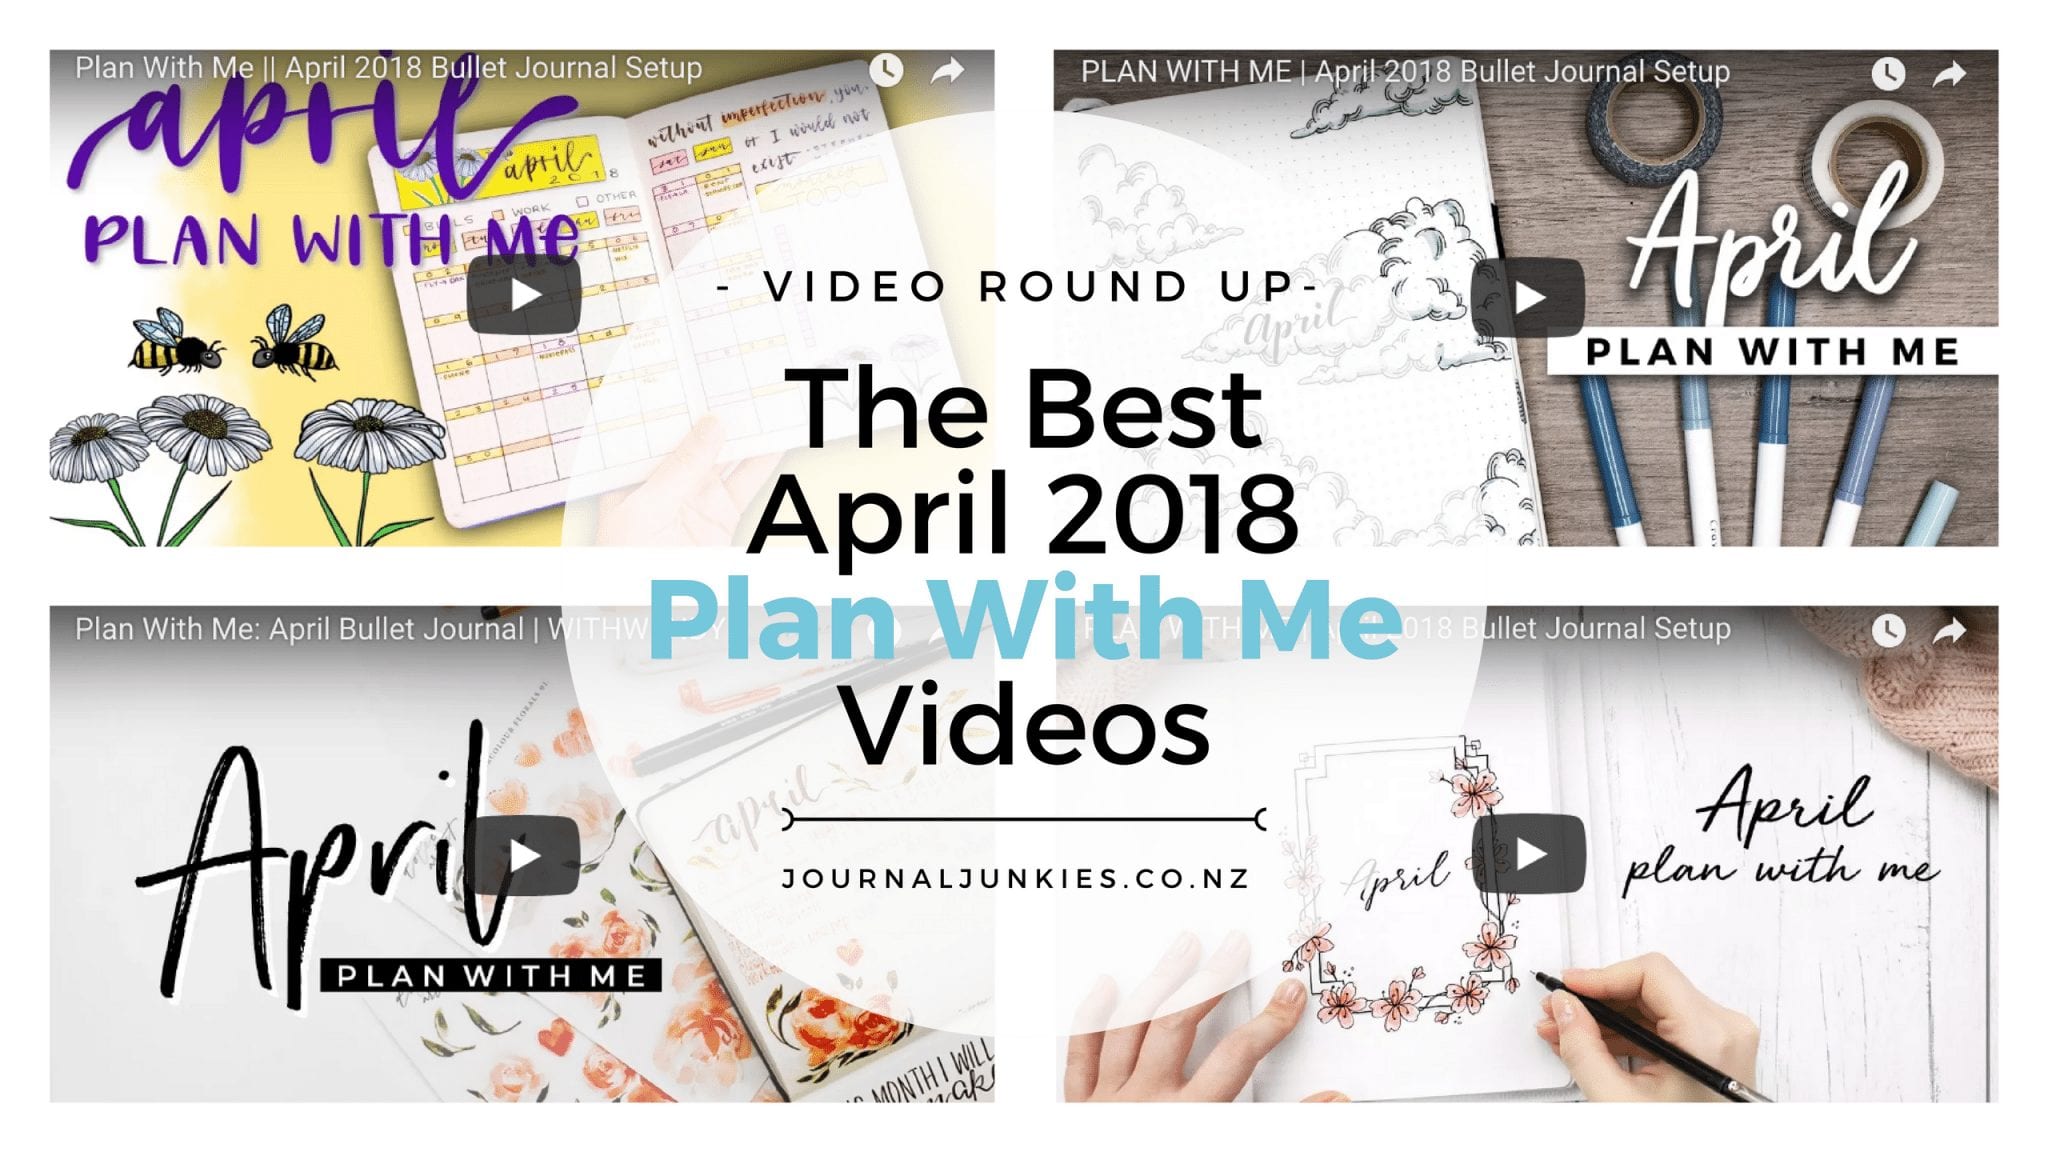 April 2018 Plan With Me | Best Video Round Up